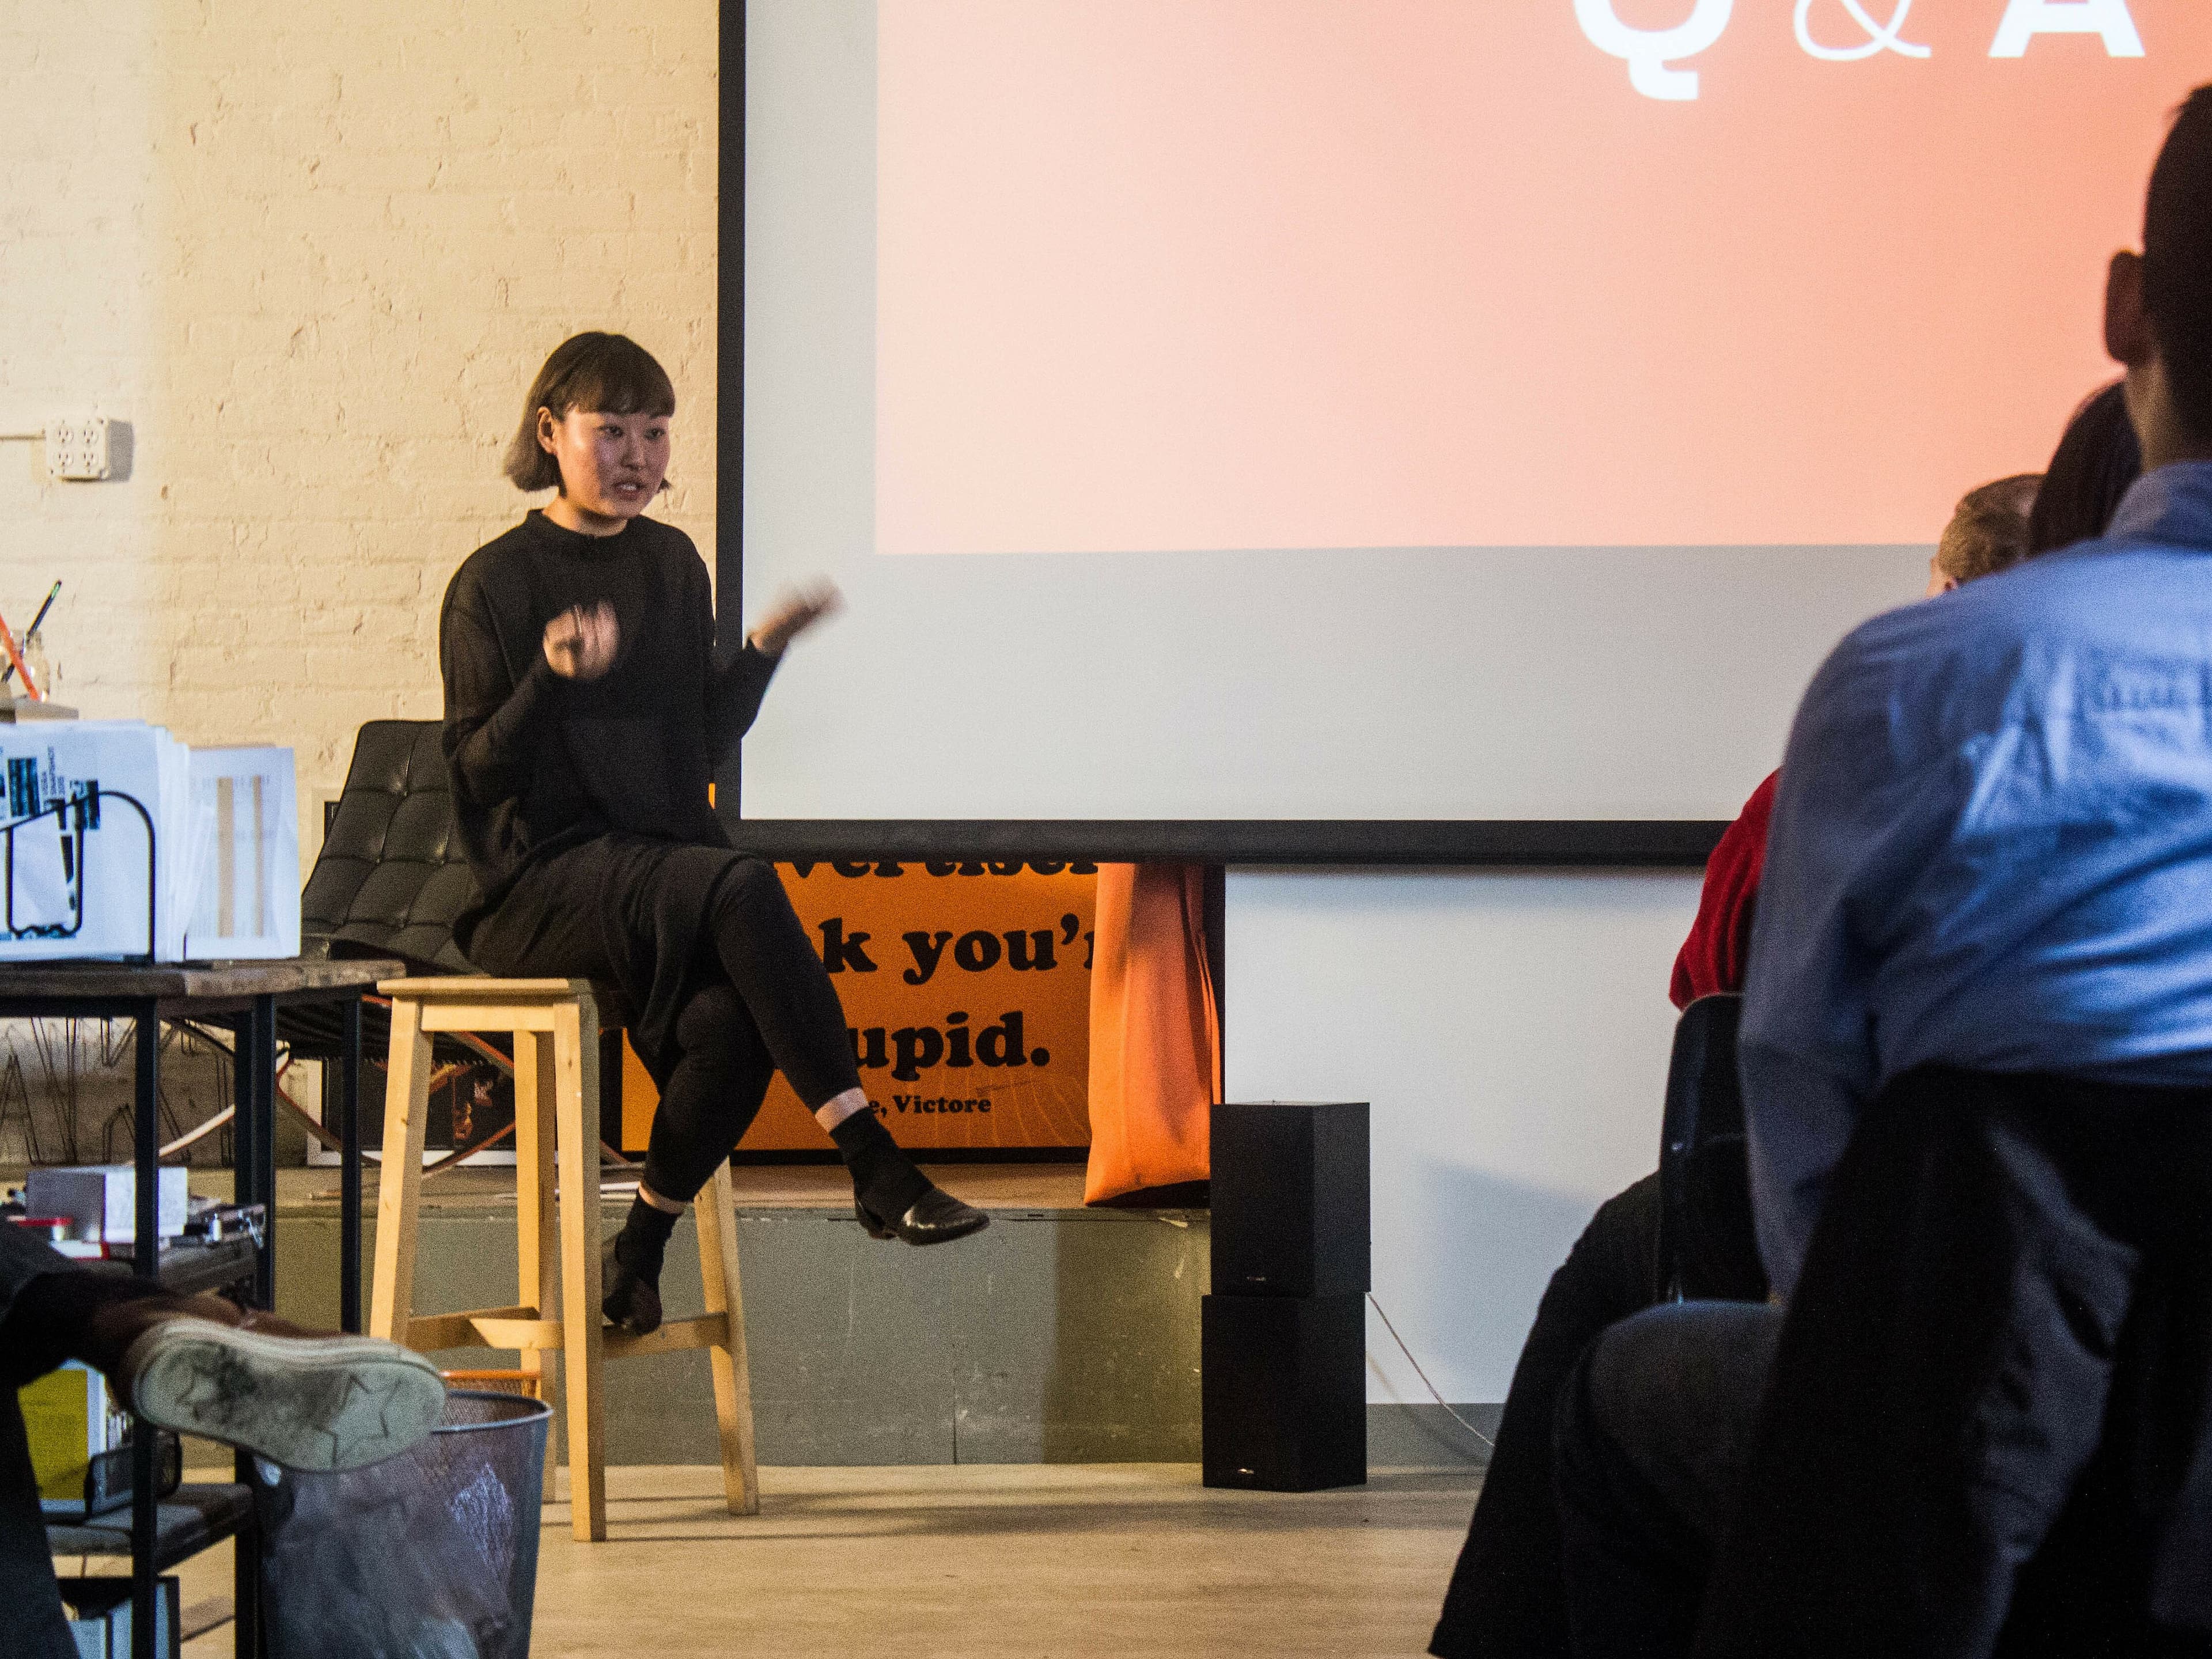 A person wearing black sits on a stool in front of a group, gesturing with their hands. Behind them, a large screen displays "Q & A" on an orange background. The setting appears to be an indoor event or lecture. Audience members are seated facing the speaker.